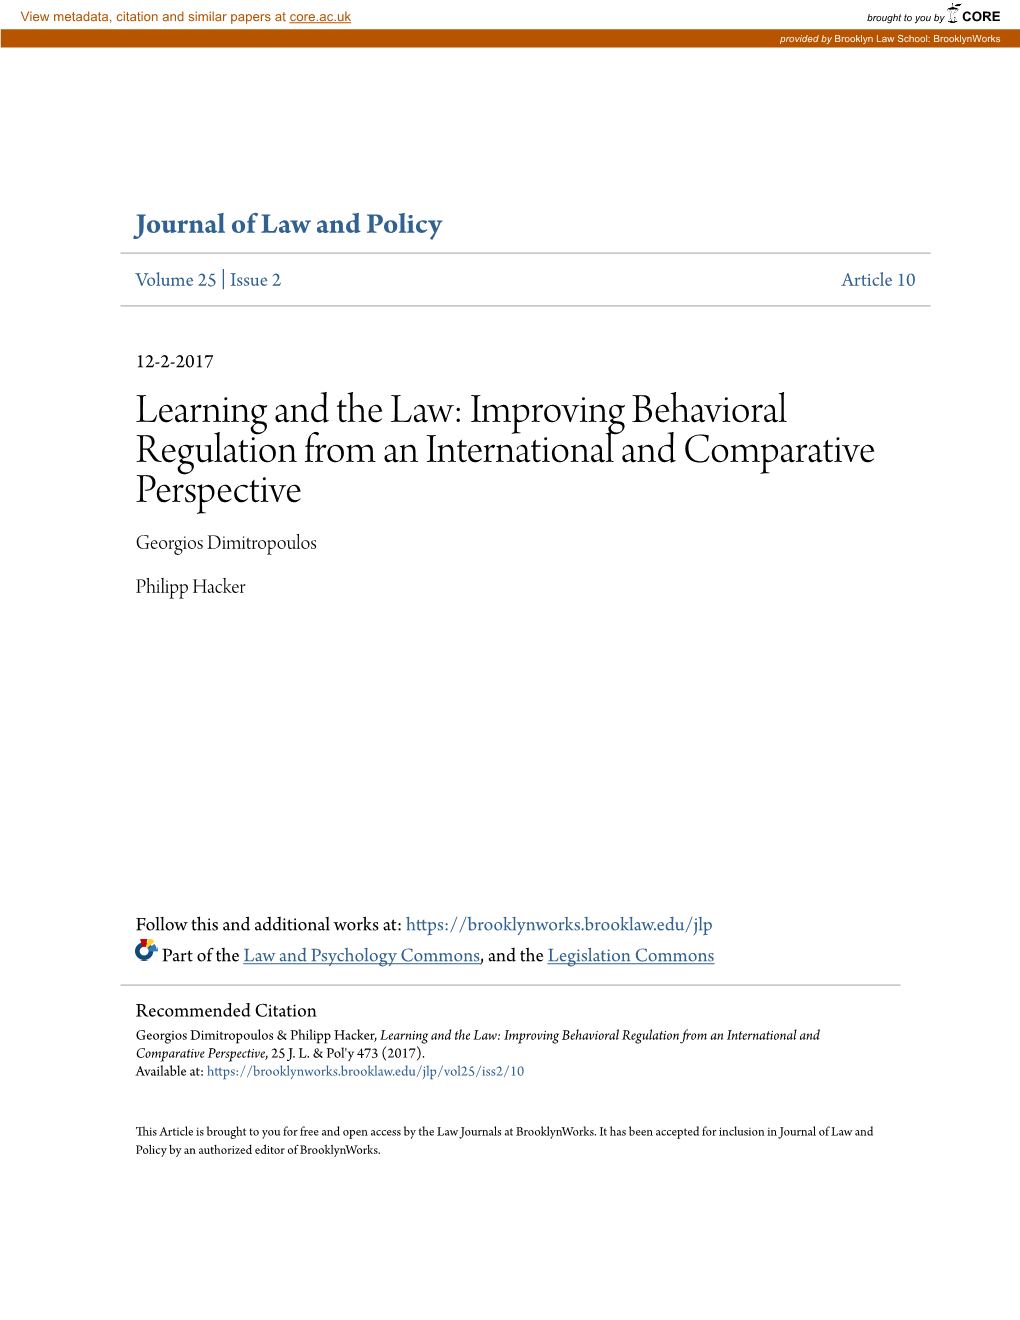 Learning and the Law: Improving Behavioral Regulation from an International and Comparative Perspective Georgios Dimitropoulos